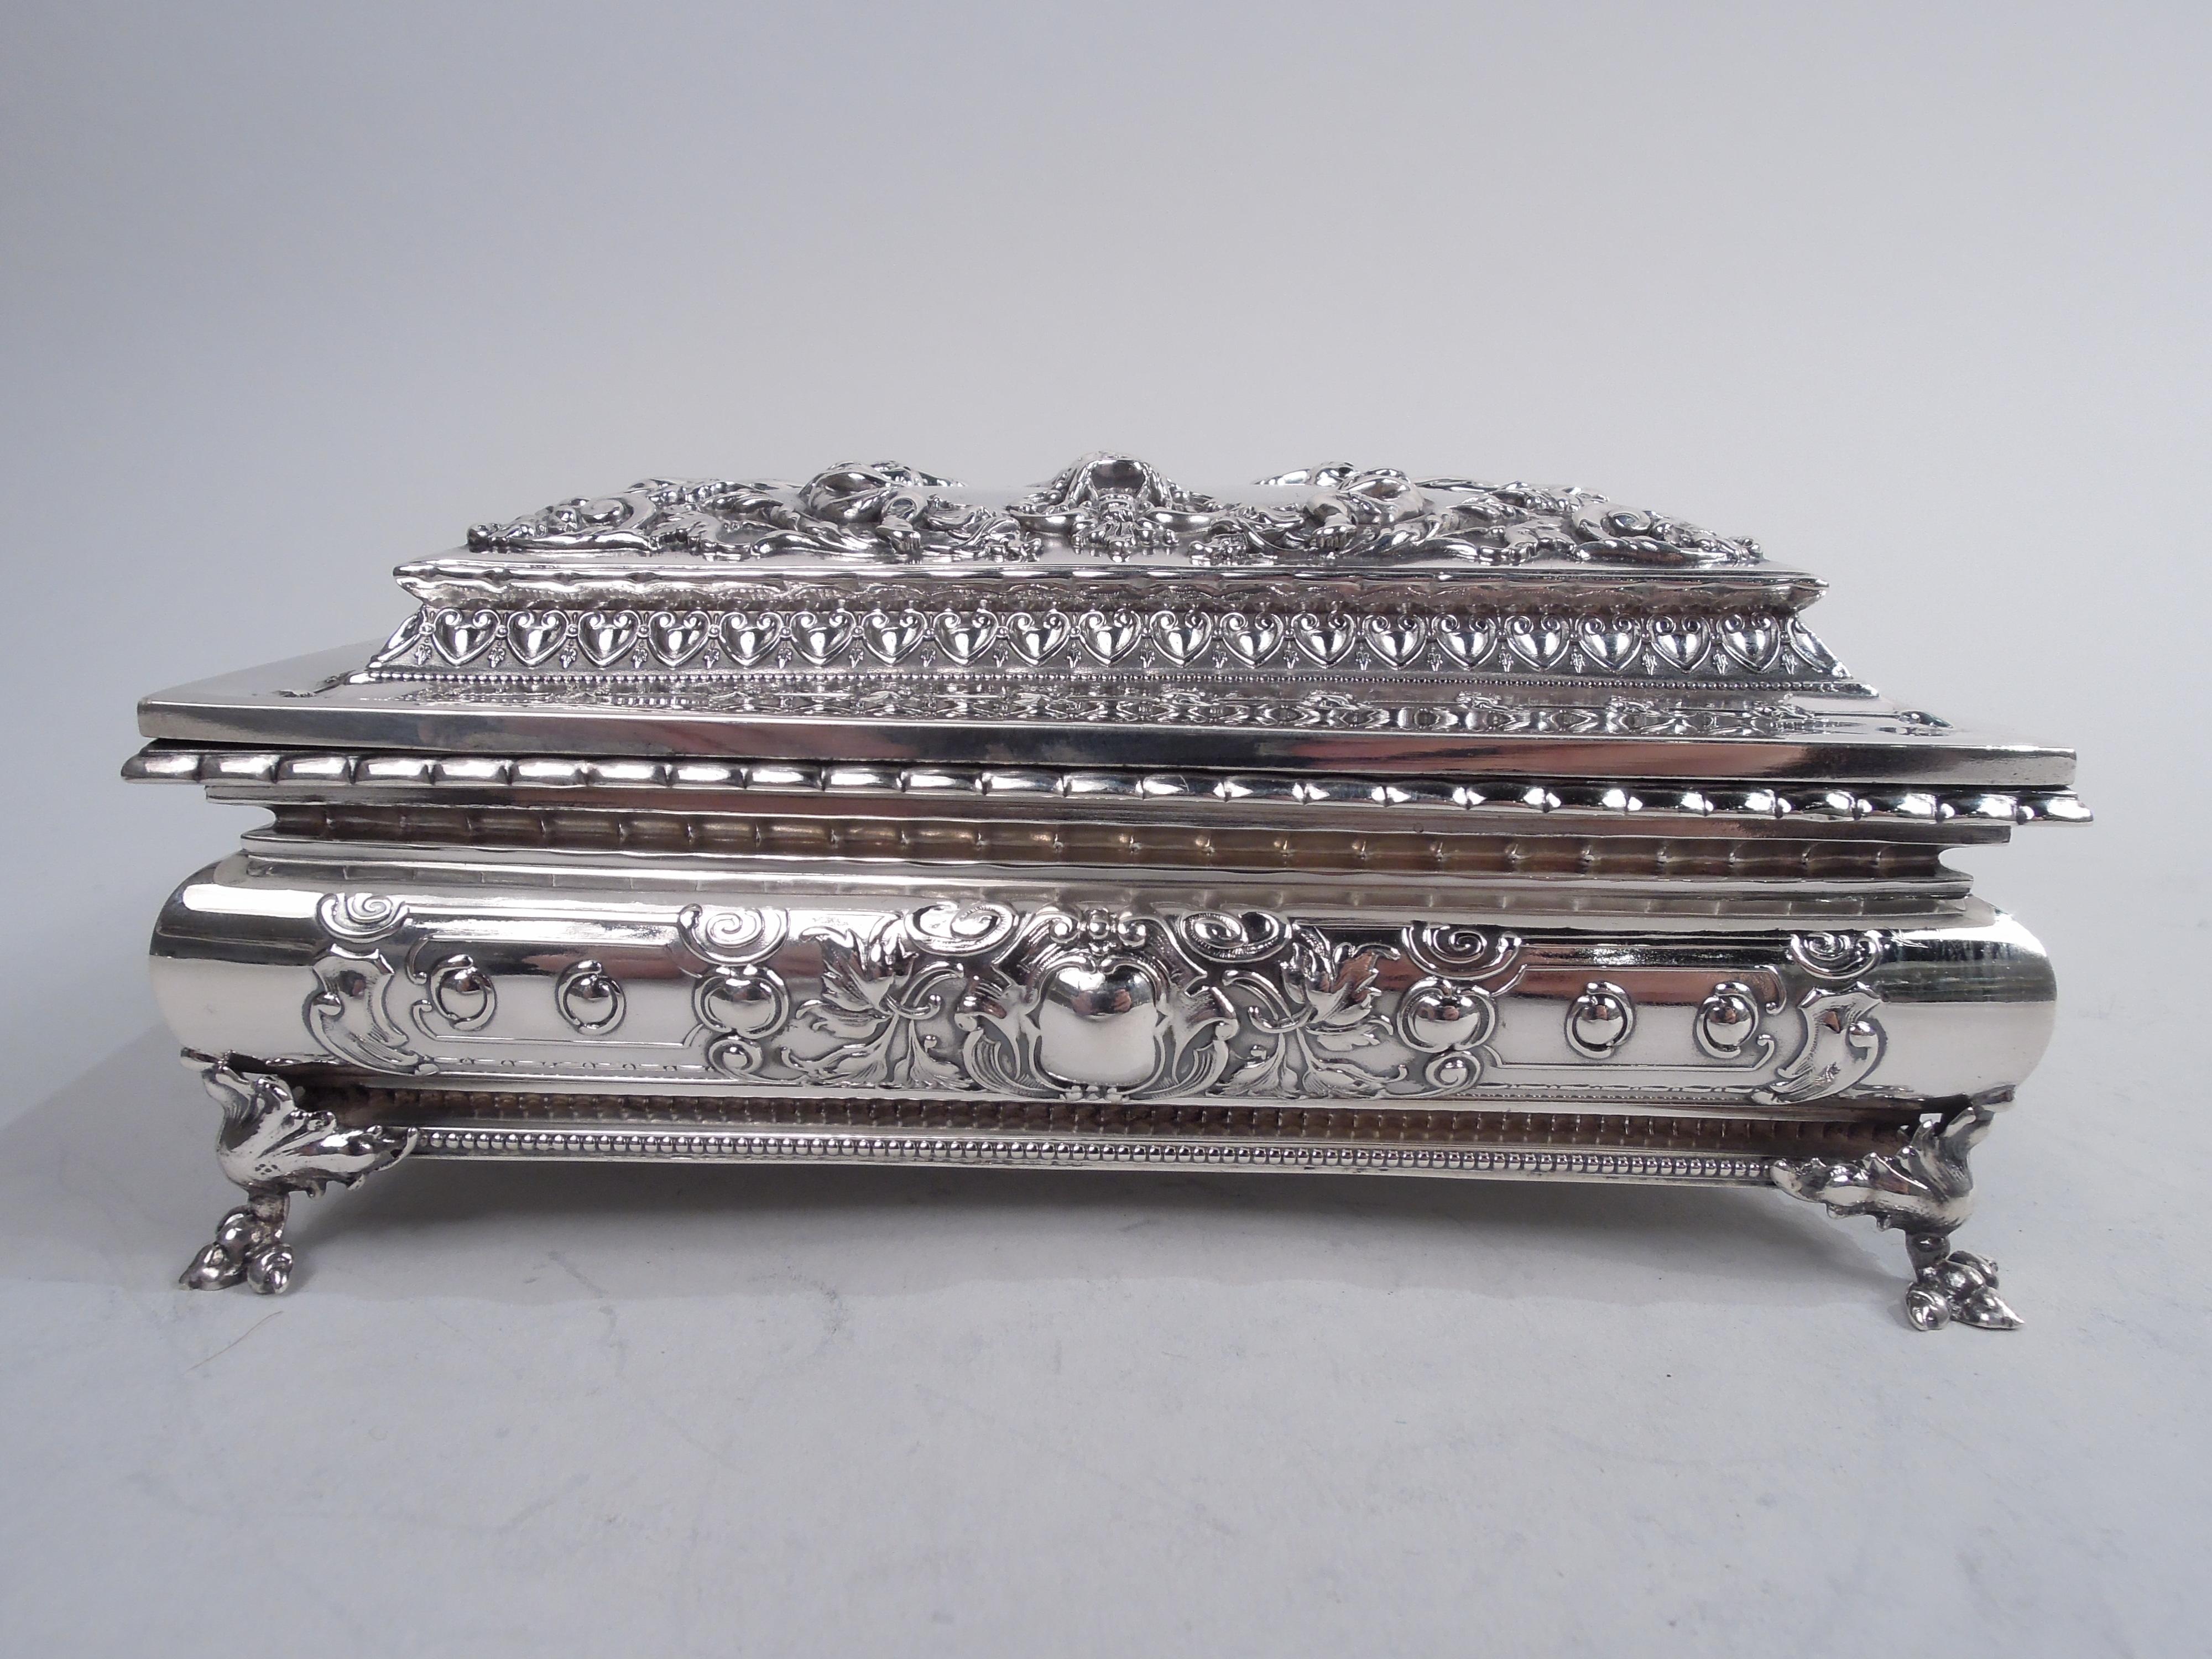 Fancy Victorian sterling silver casket box. Made by William B. Kerr & Co. in Newark, ca 1890. Rectangular with bellied sides. Cover raised and hinged. Four leaf-mounted talon supports. Classical ornament: On sides strapwork cartouches (vacant) with